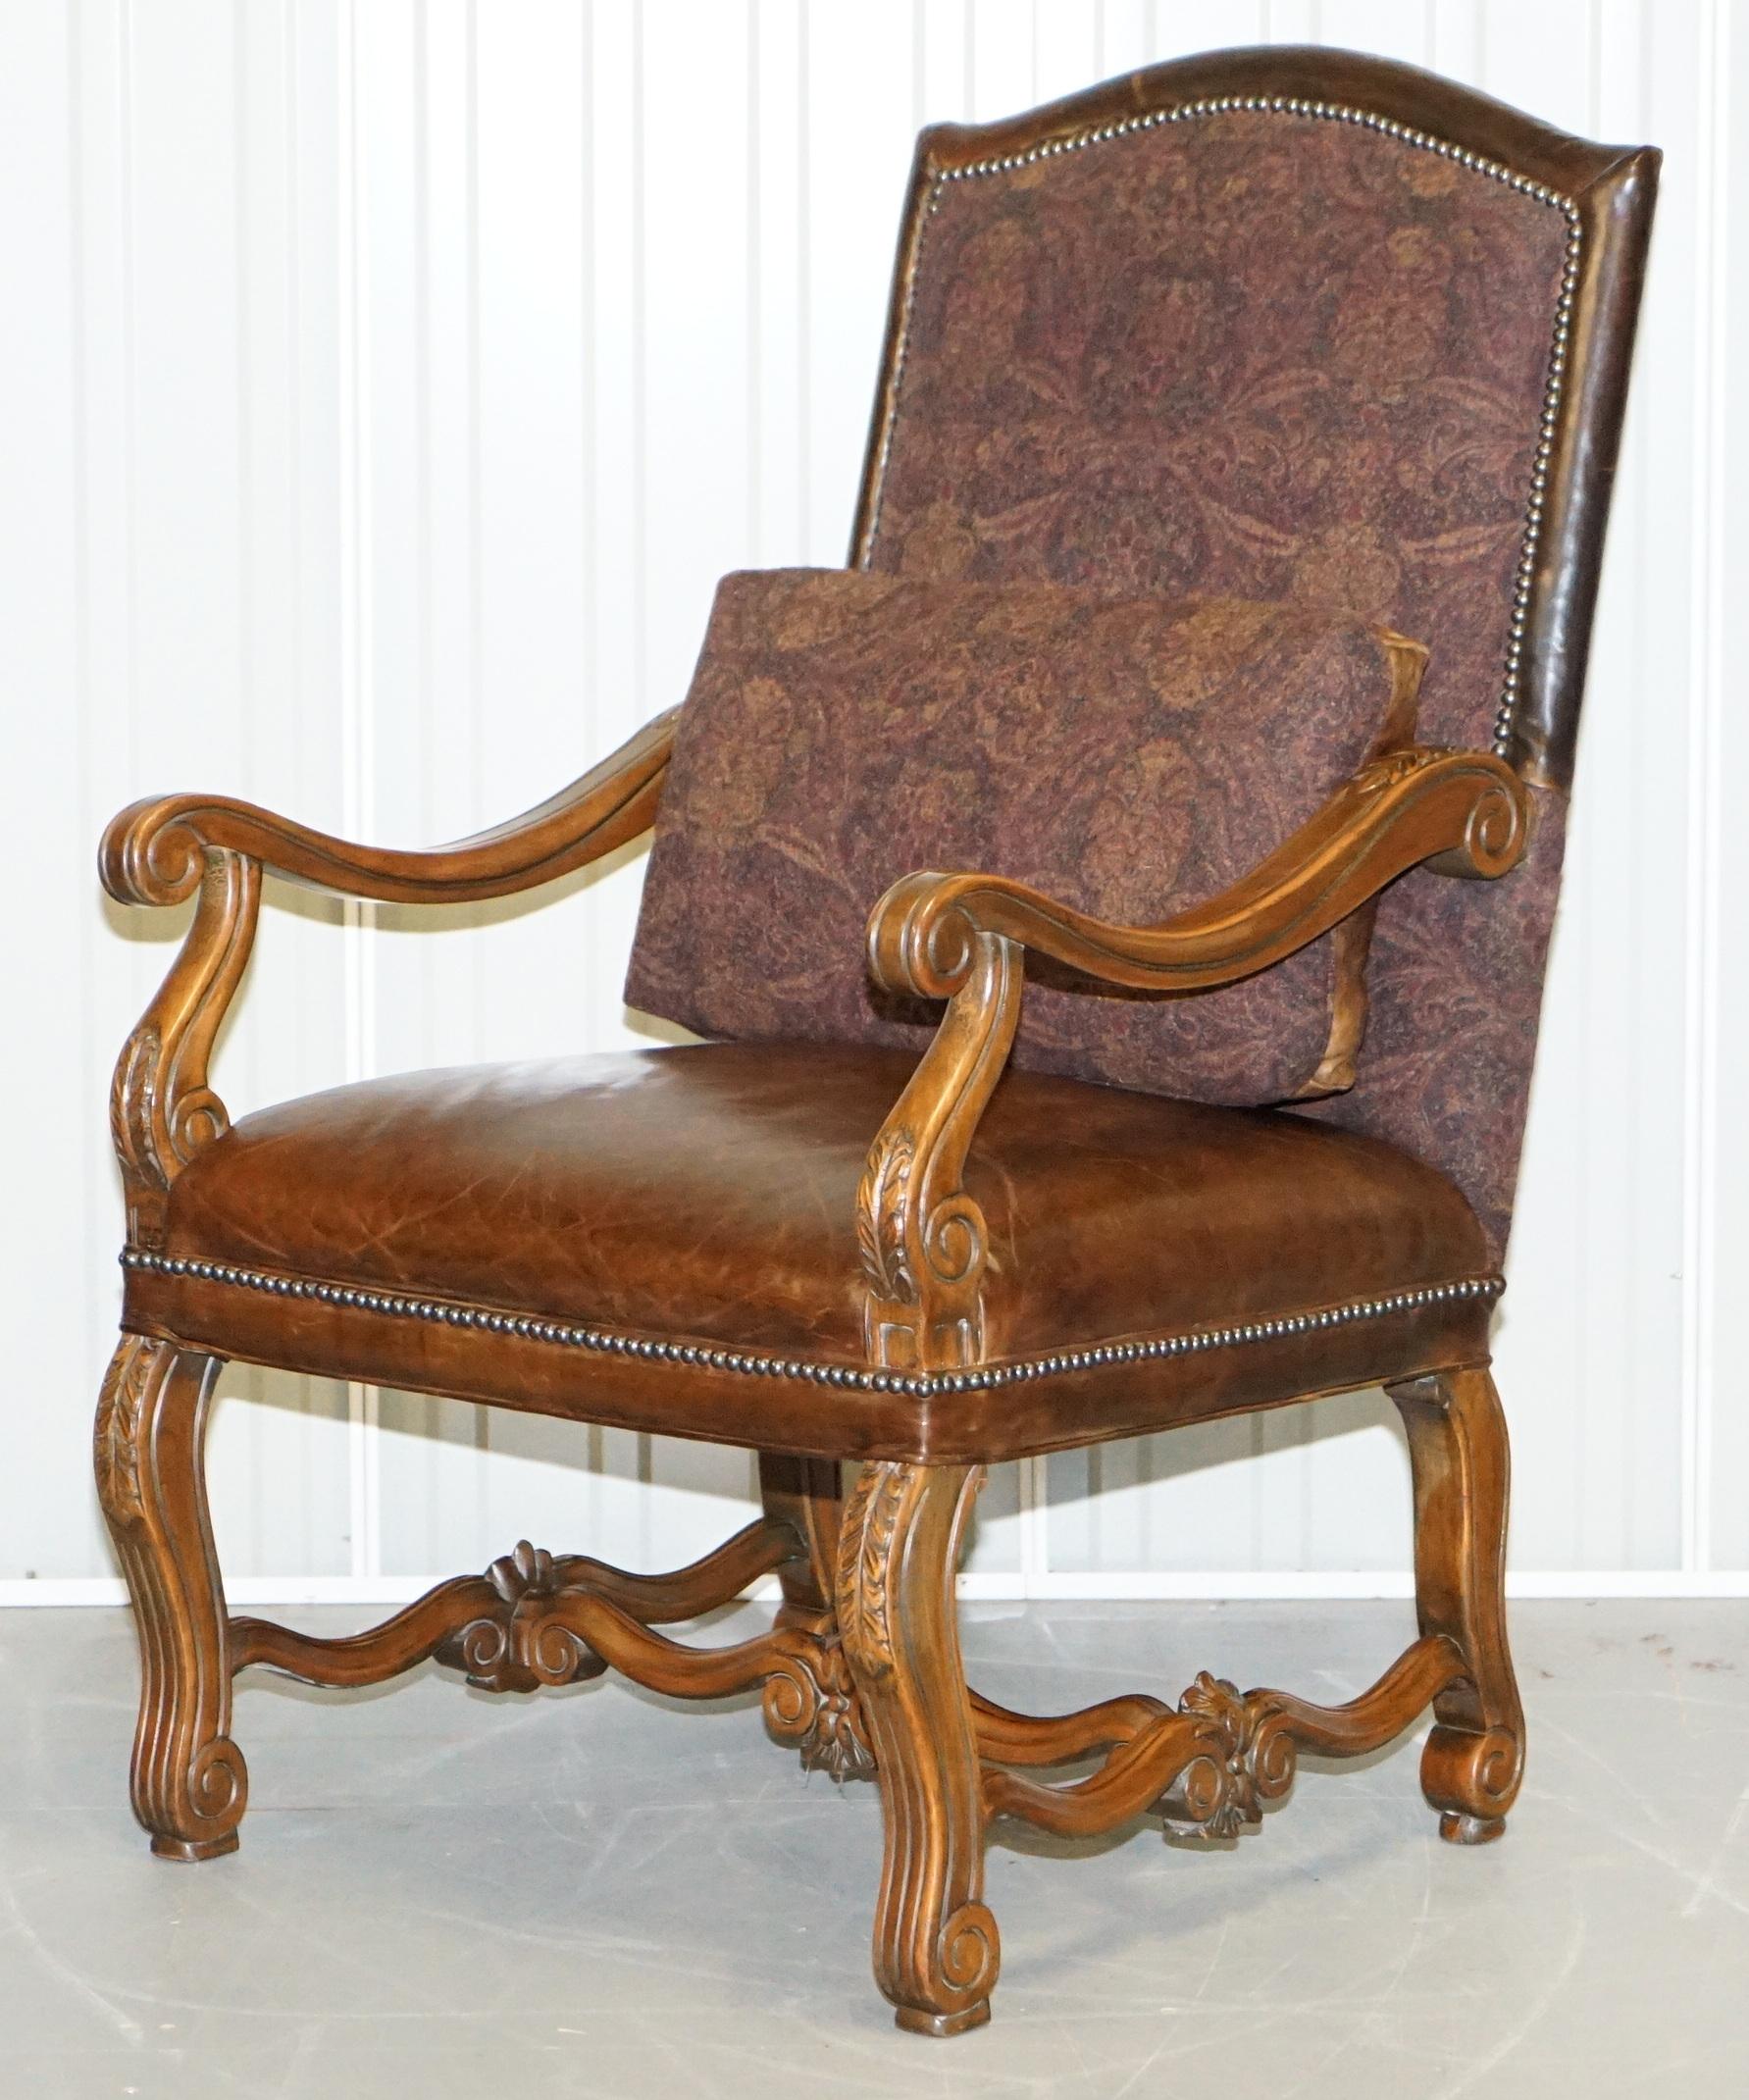 We are delighted to offer for sale this absolutely stunning pair of Ralph Lauren Edmund throne heritage brown leather armchairs

A very good looking and well made pair, each chair has its own feather filled lumbar cushion, brown leather on one